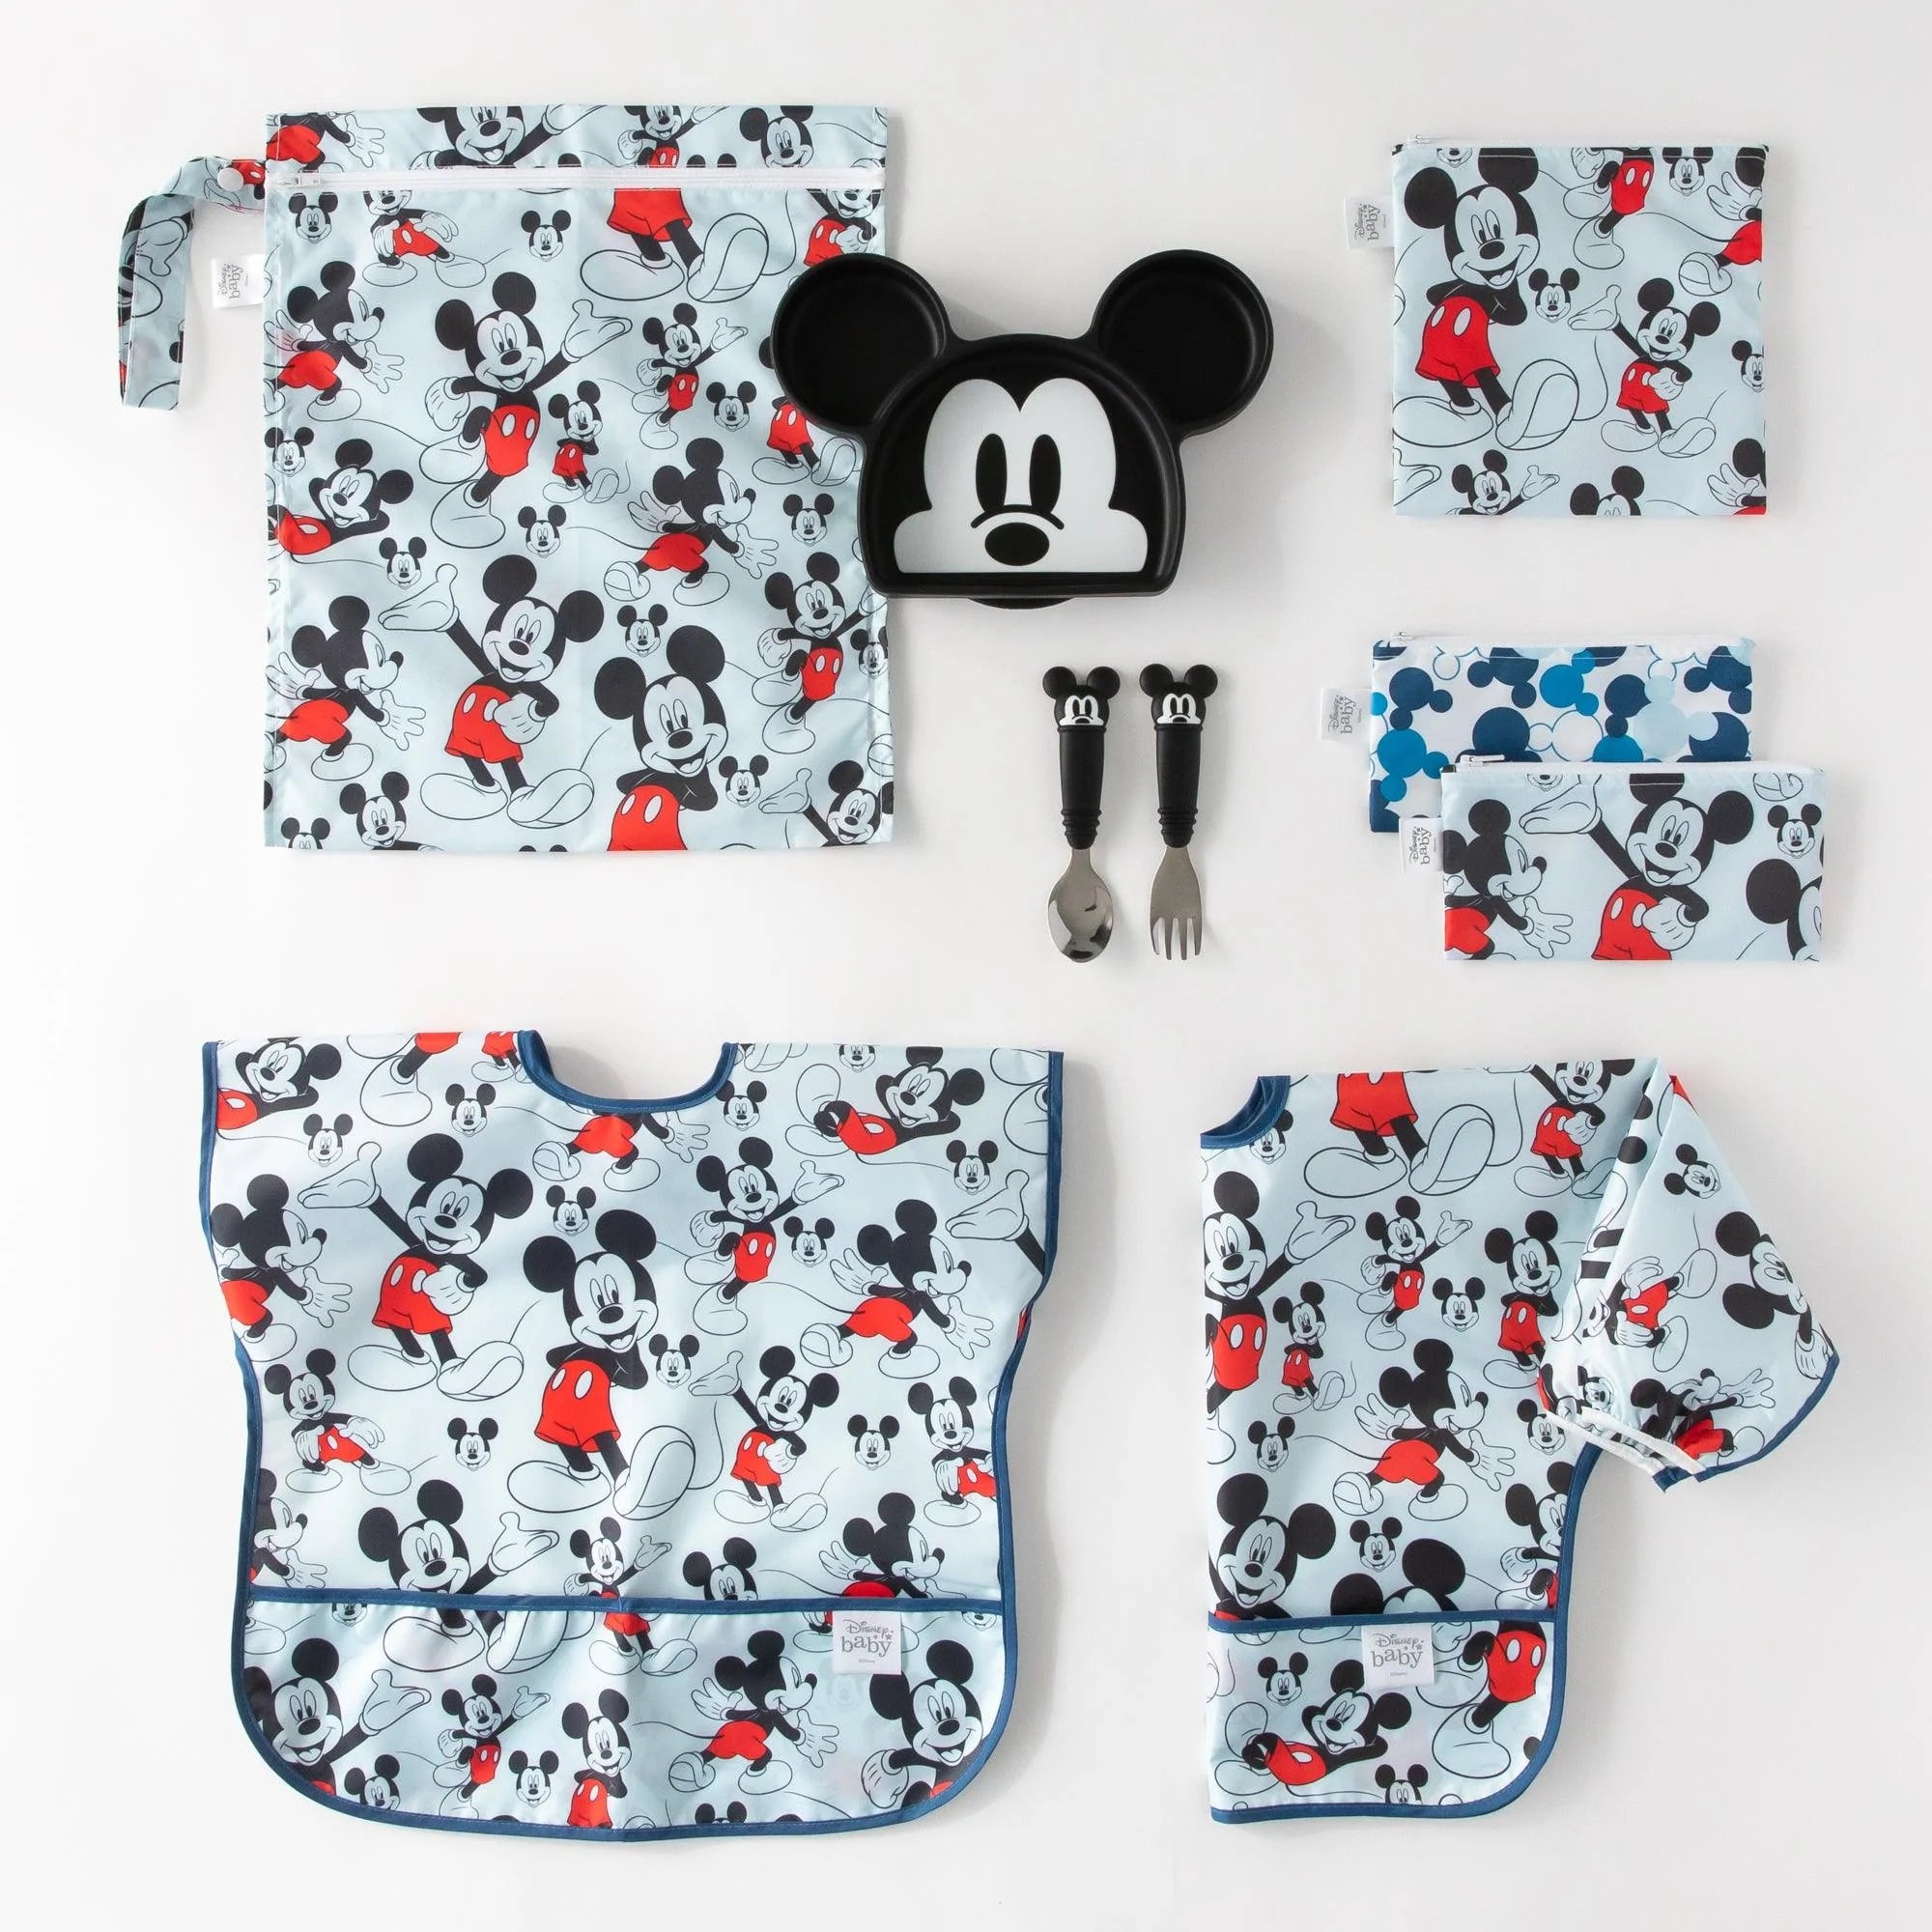 Disney Little Toddlers Gift Bundle, Mickey Mouse Classic - Bumkins